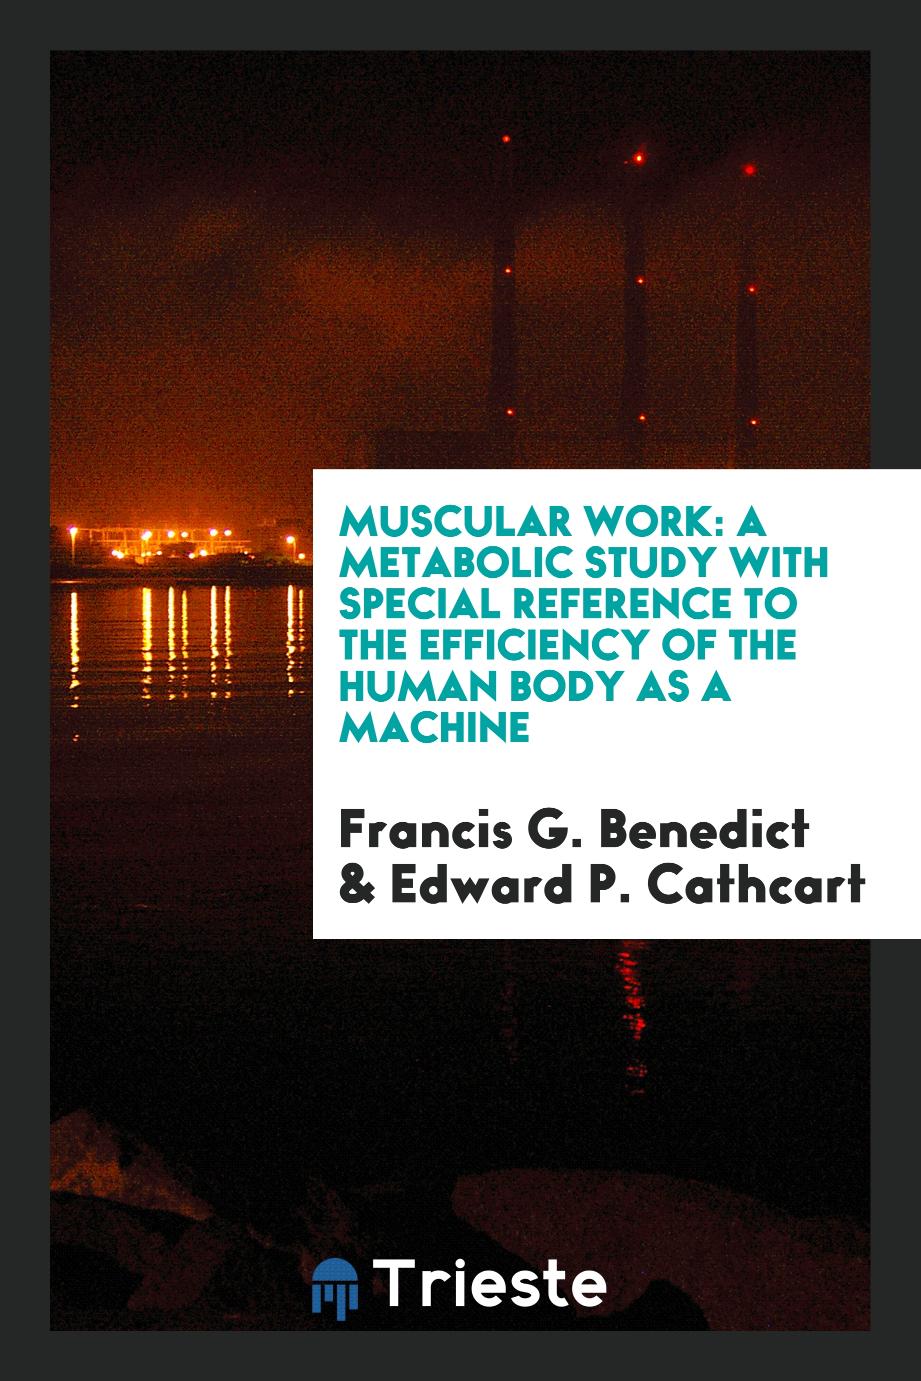 Muscular Work: A Metabolic Study with Special Reference to the Efficiency of the Human Body as a Machine